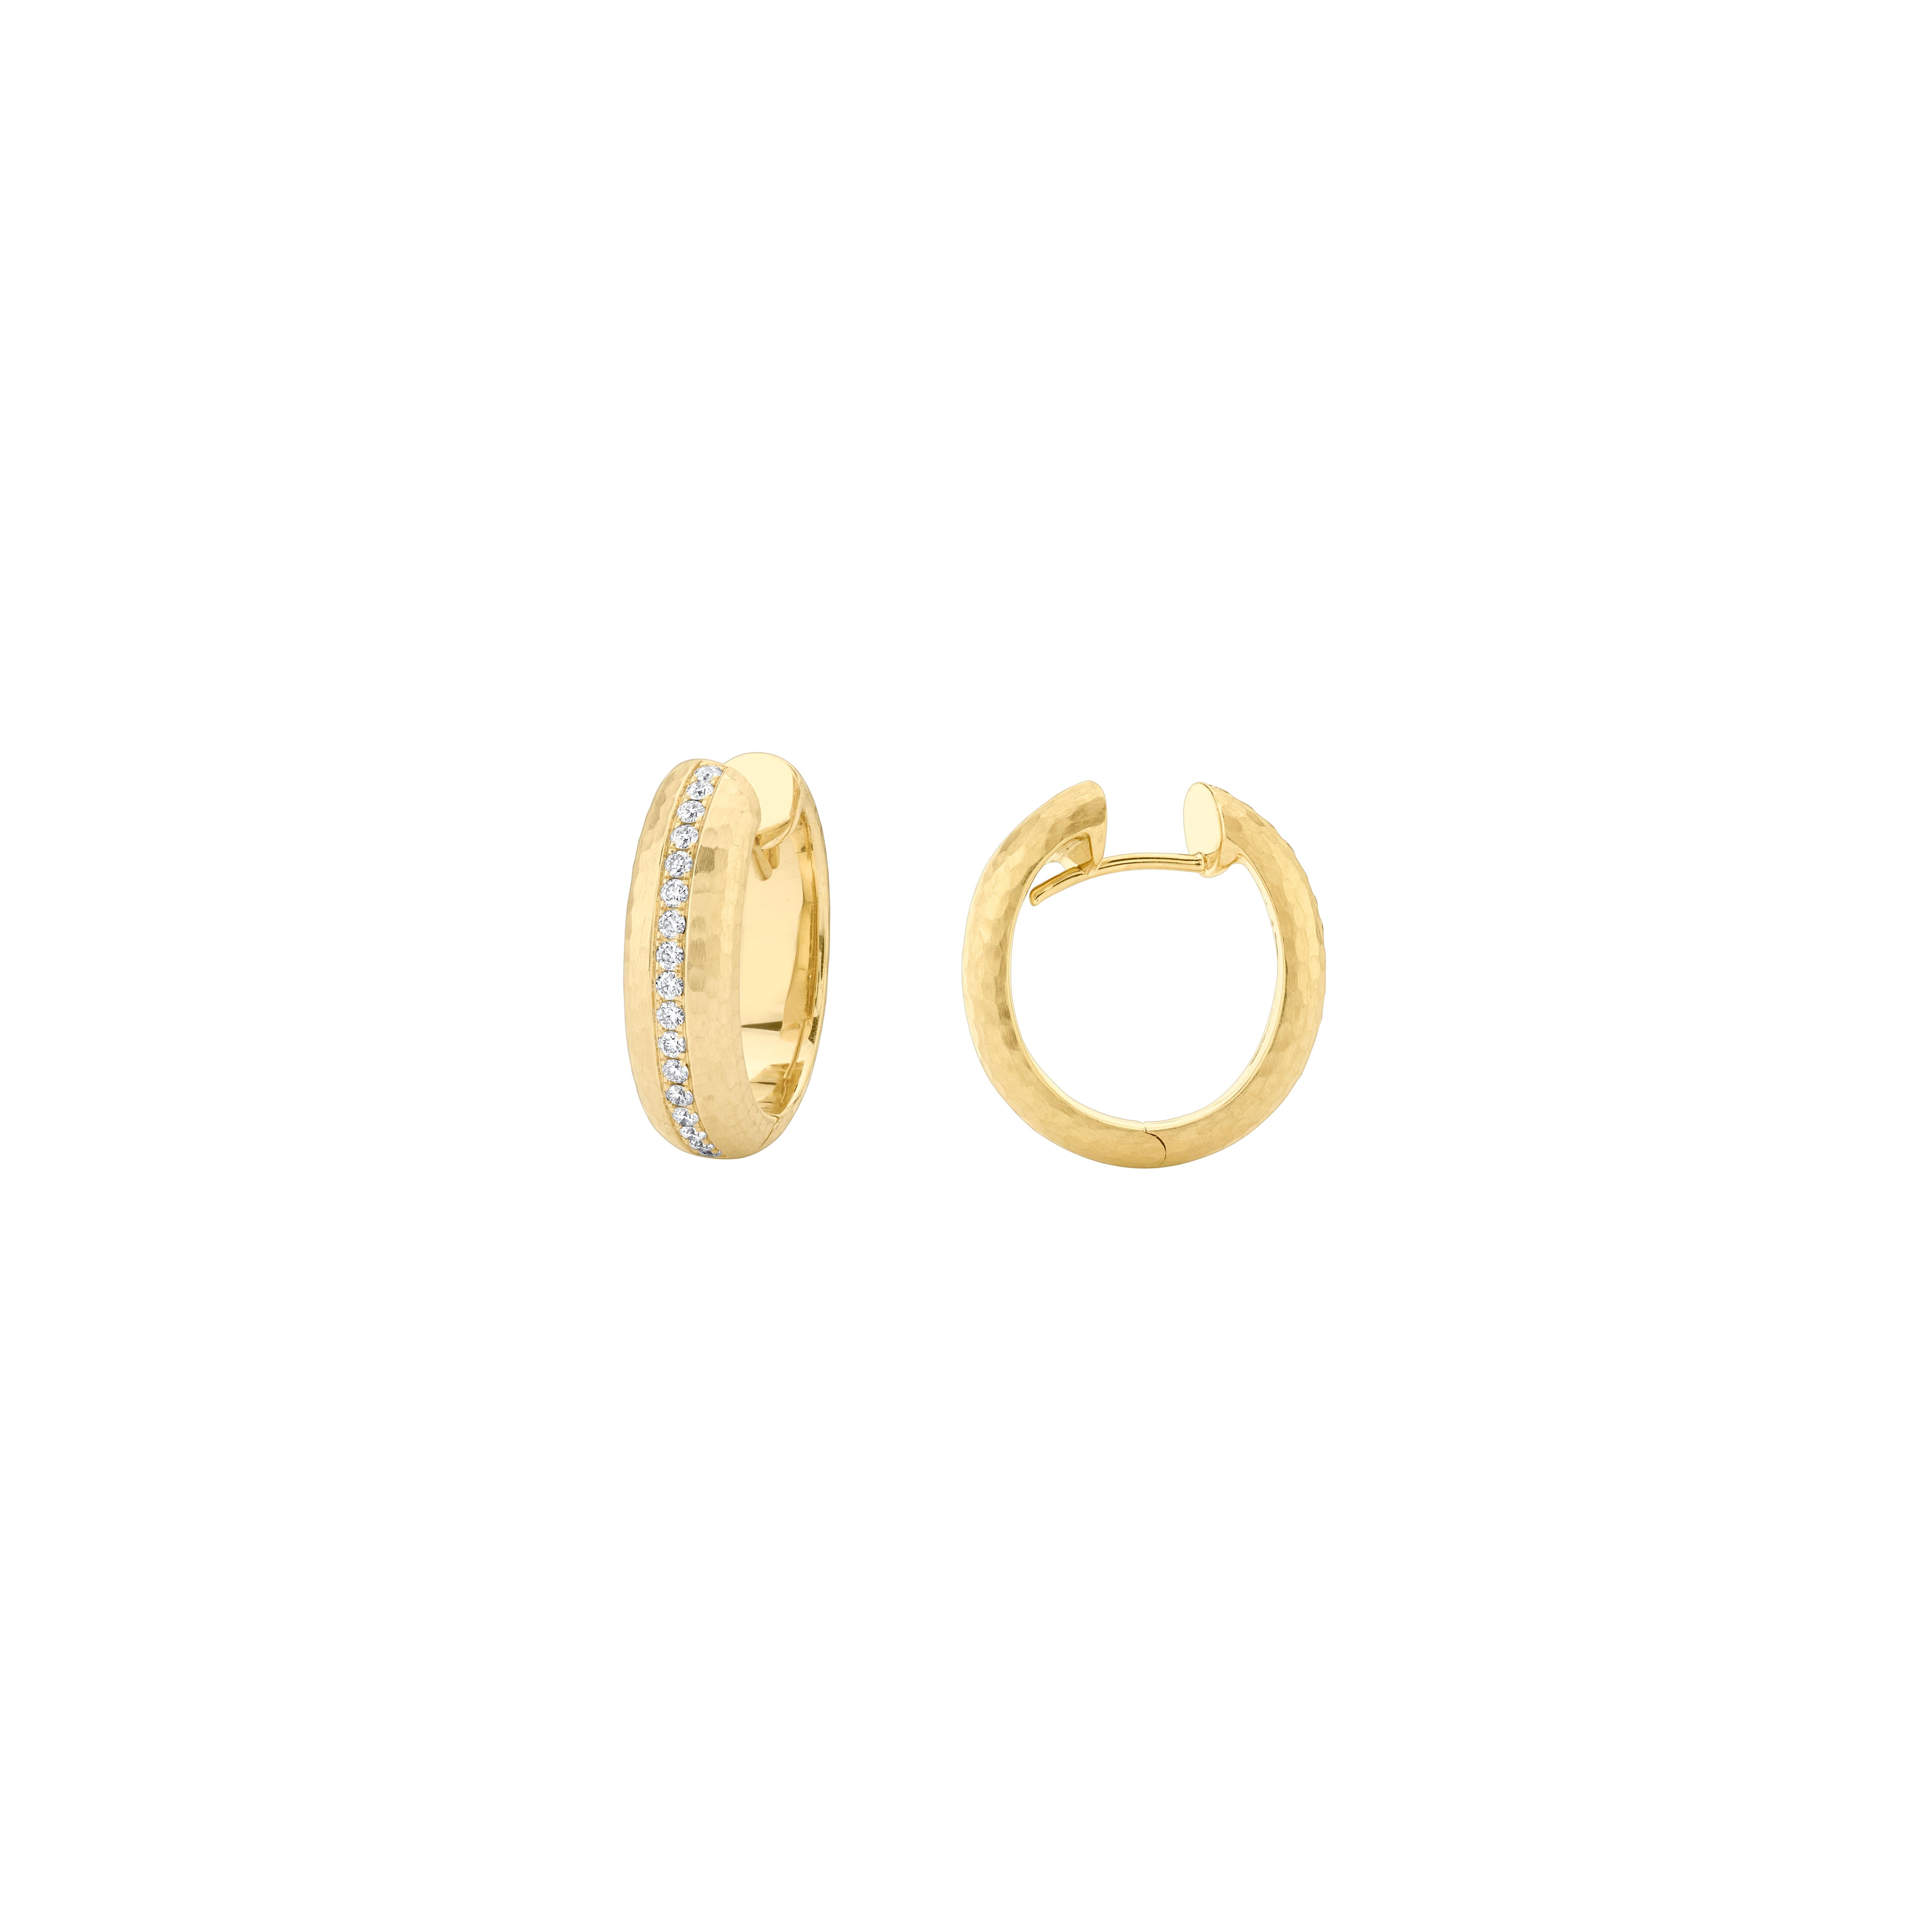 Style #: XH15H.
SYLVIA KONTENTE  18K Yellow gold diamond hoop earrings with hammered finish.
Precision-cut, round brilliant diamonds.
Diamond total weight: 0.31ct tw.
Diamond color/clarity: DEF/VVS VS.
Hammered finish.
High-end construction.
Size: